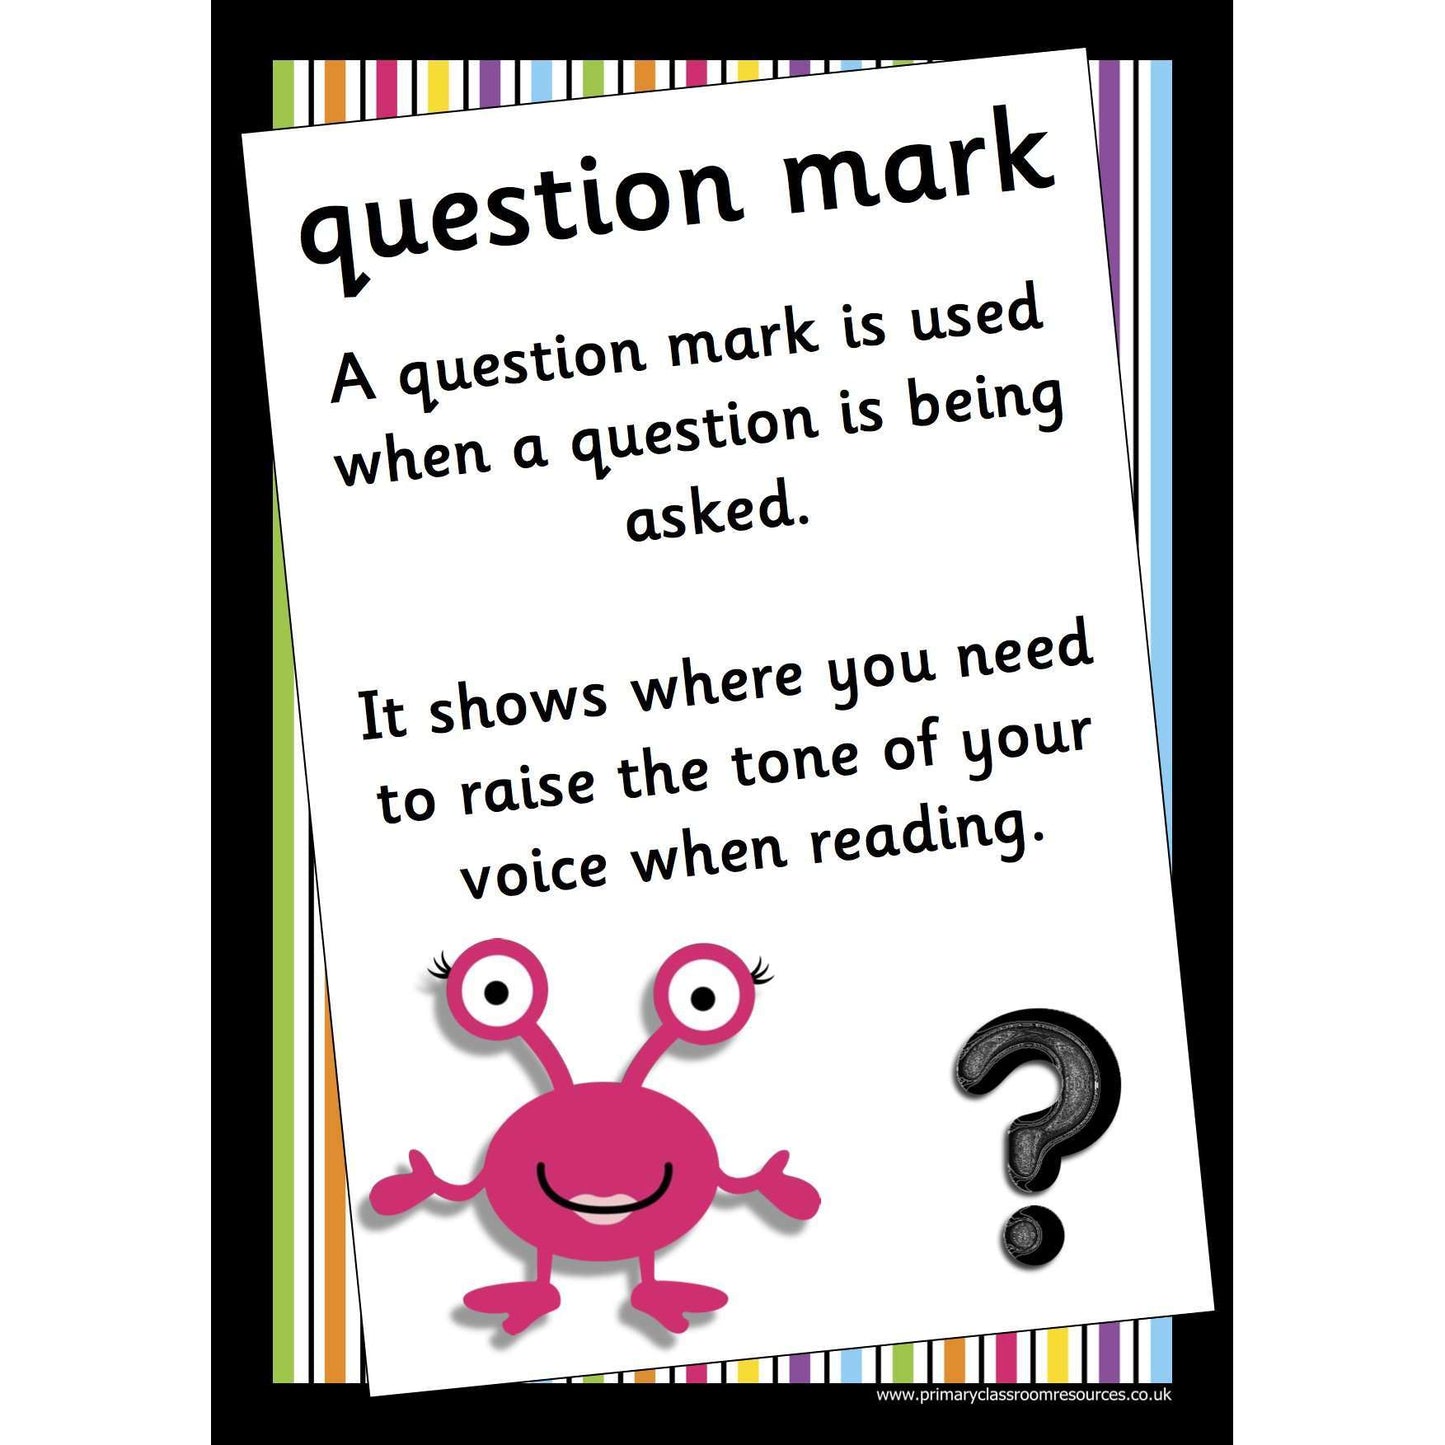 Alien Punctuation Posters:Primary Classroom Resources